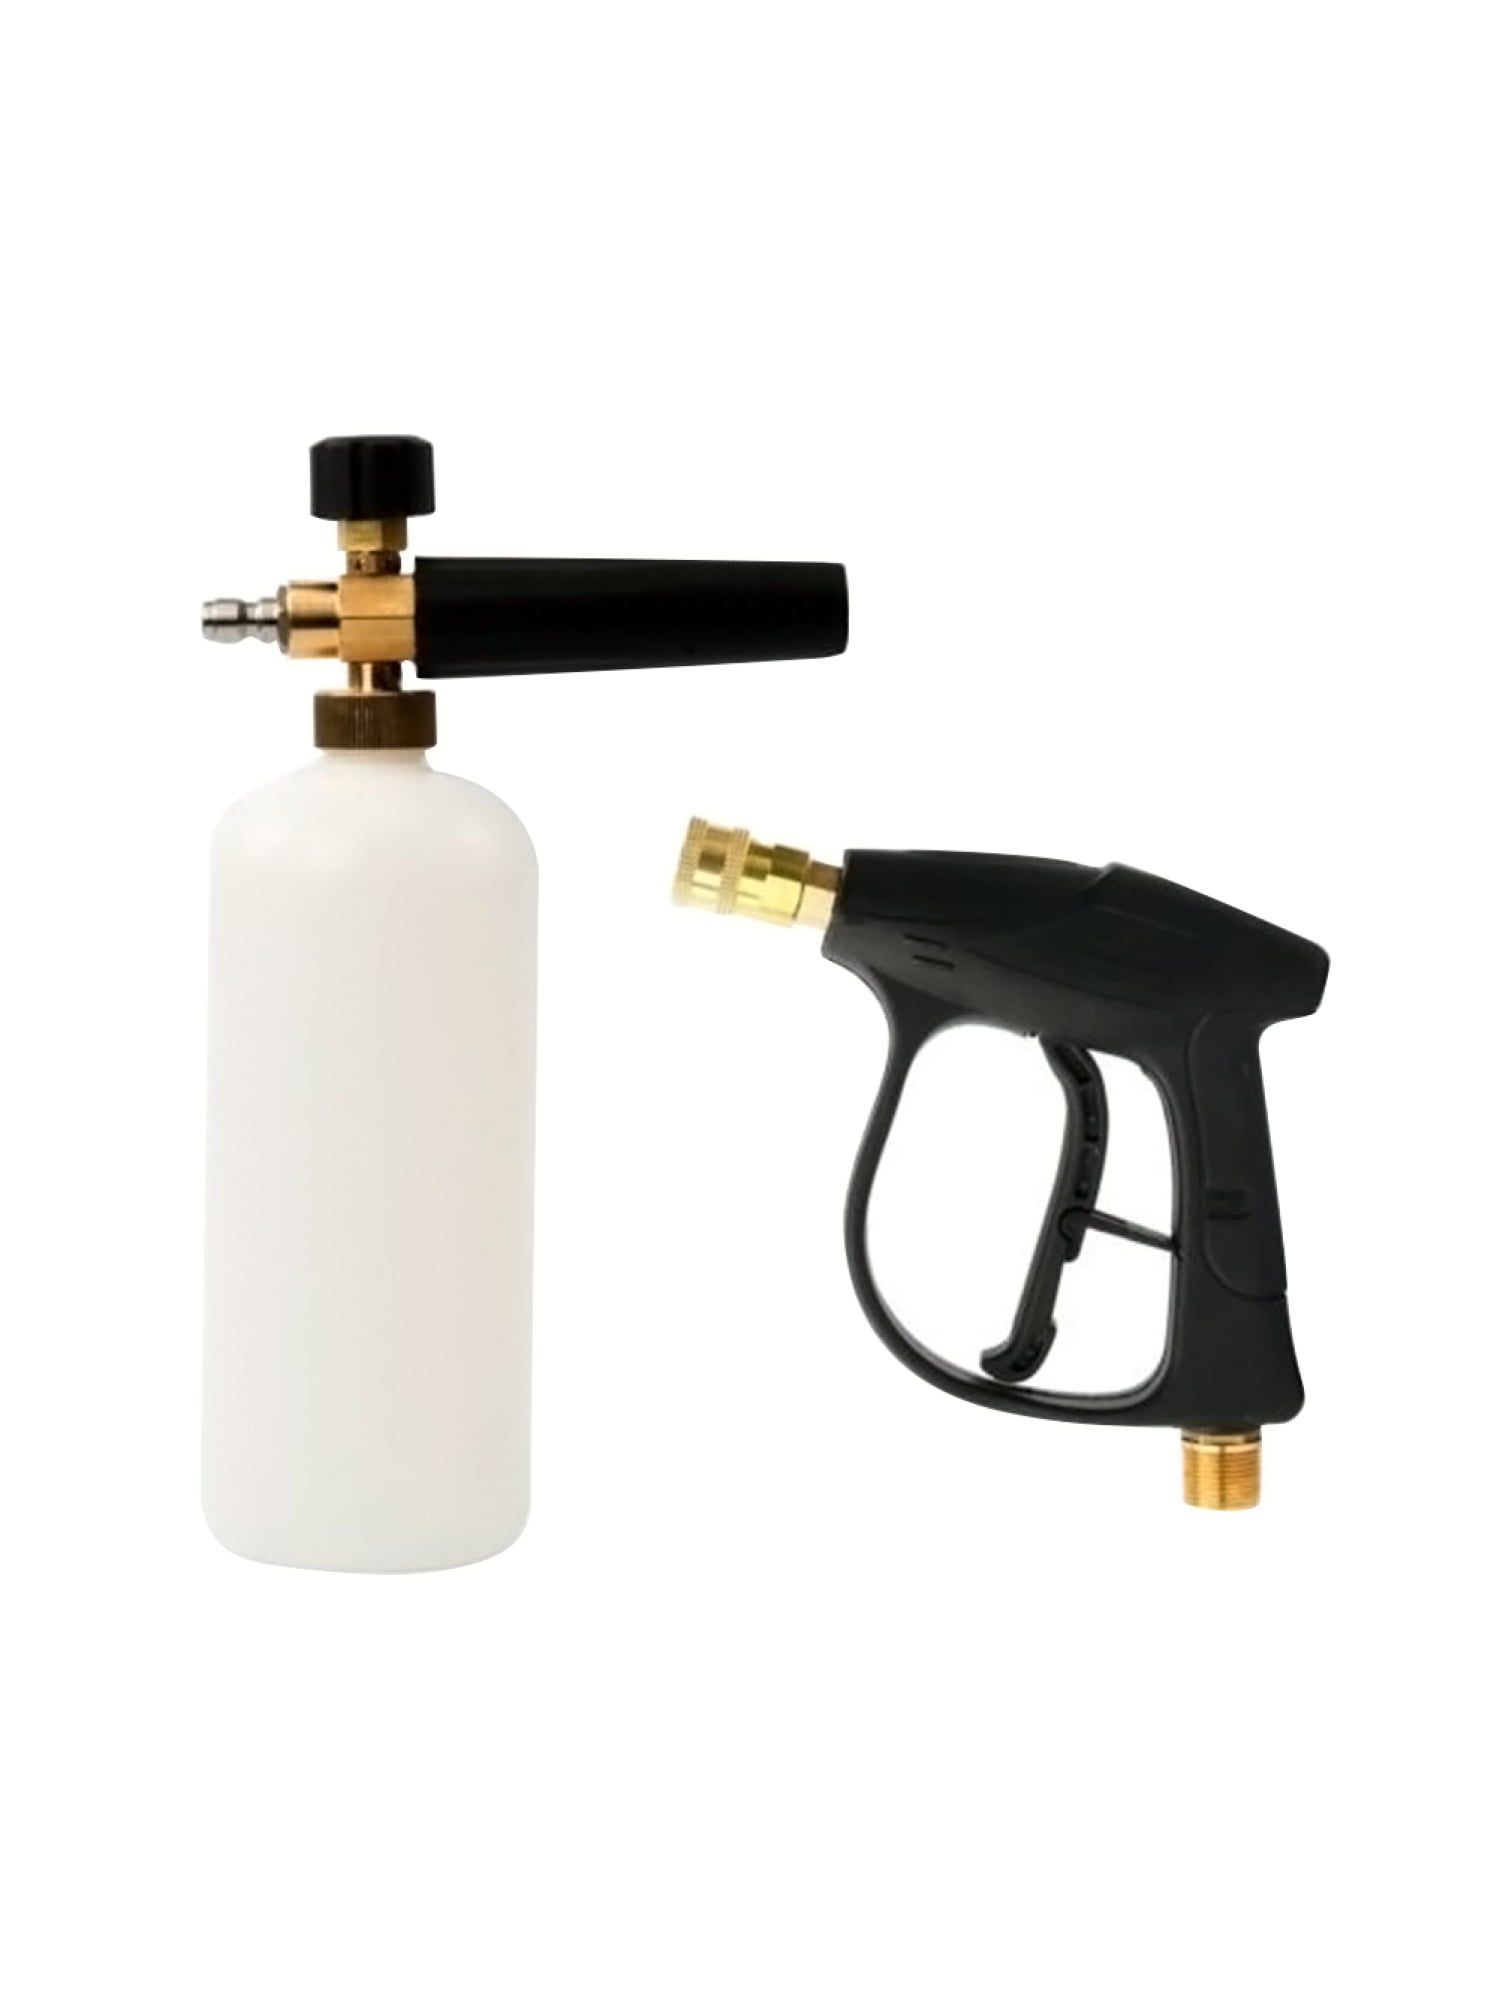 1 X PROFESSIONAL JET WASH PRESSURE WASHER GUN AND LANCE FATHERS DAY 